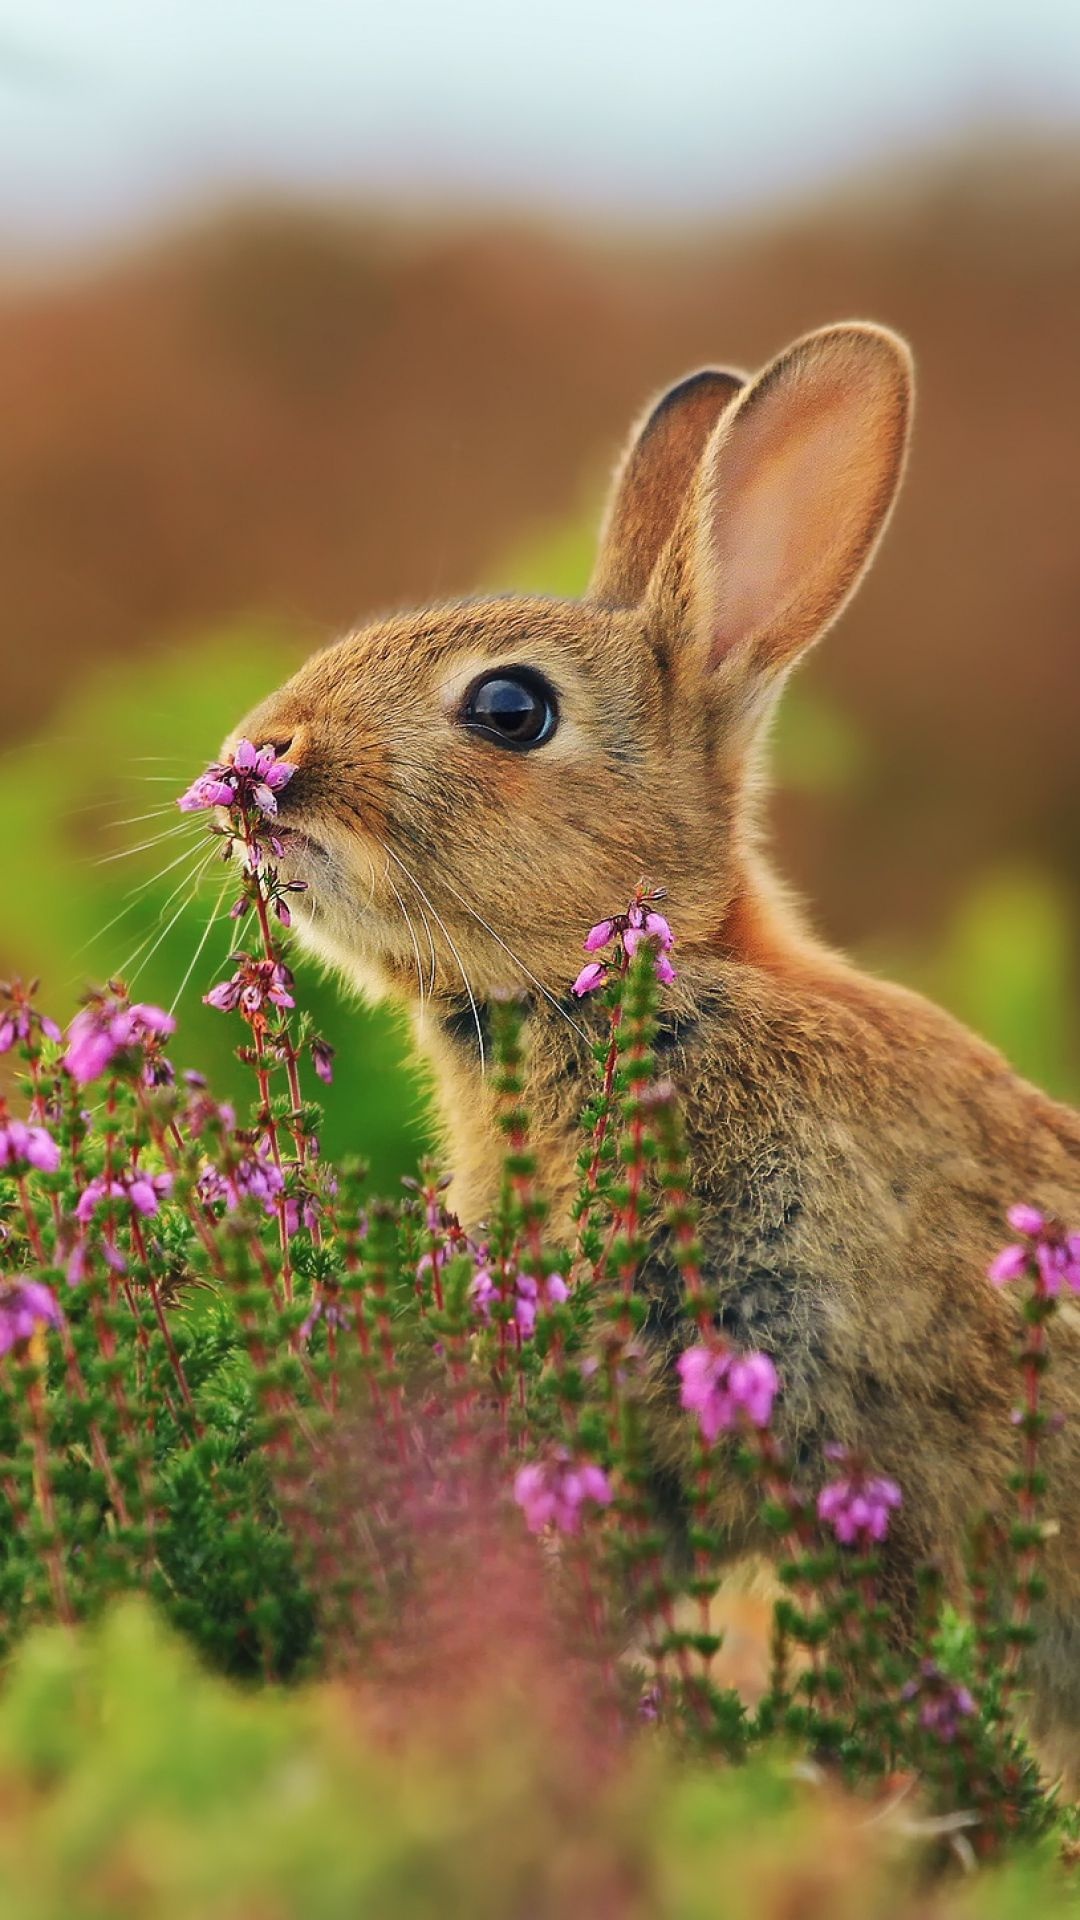 Bunny: Pet rabbits, A domesticated breed that lack survival instincts. 1080x1920 Full HD Wallpaper.